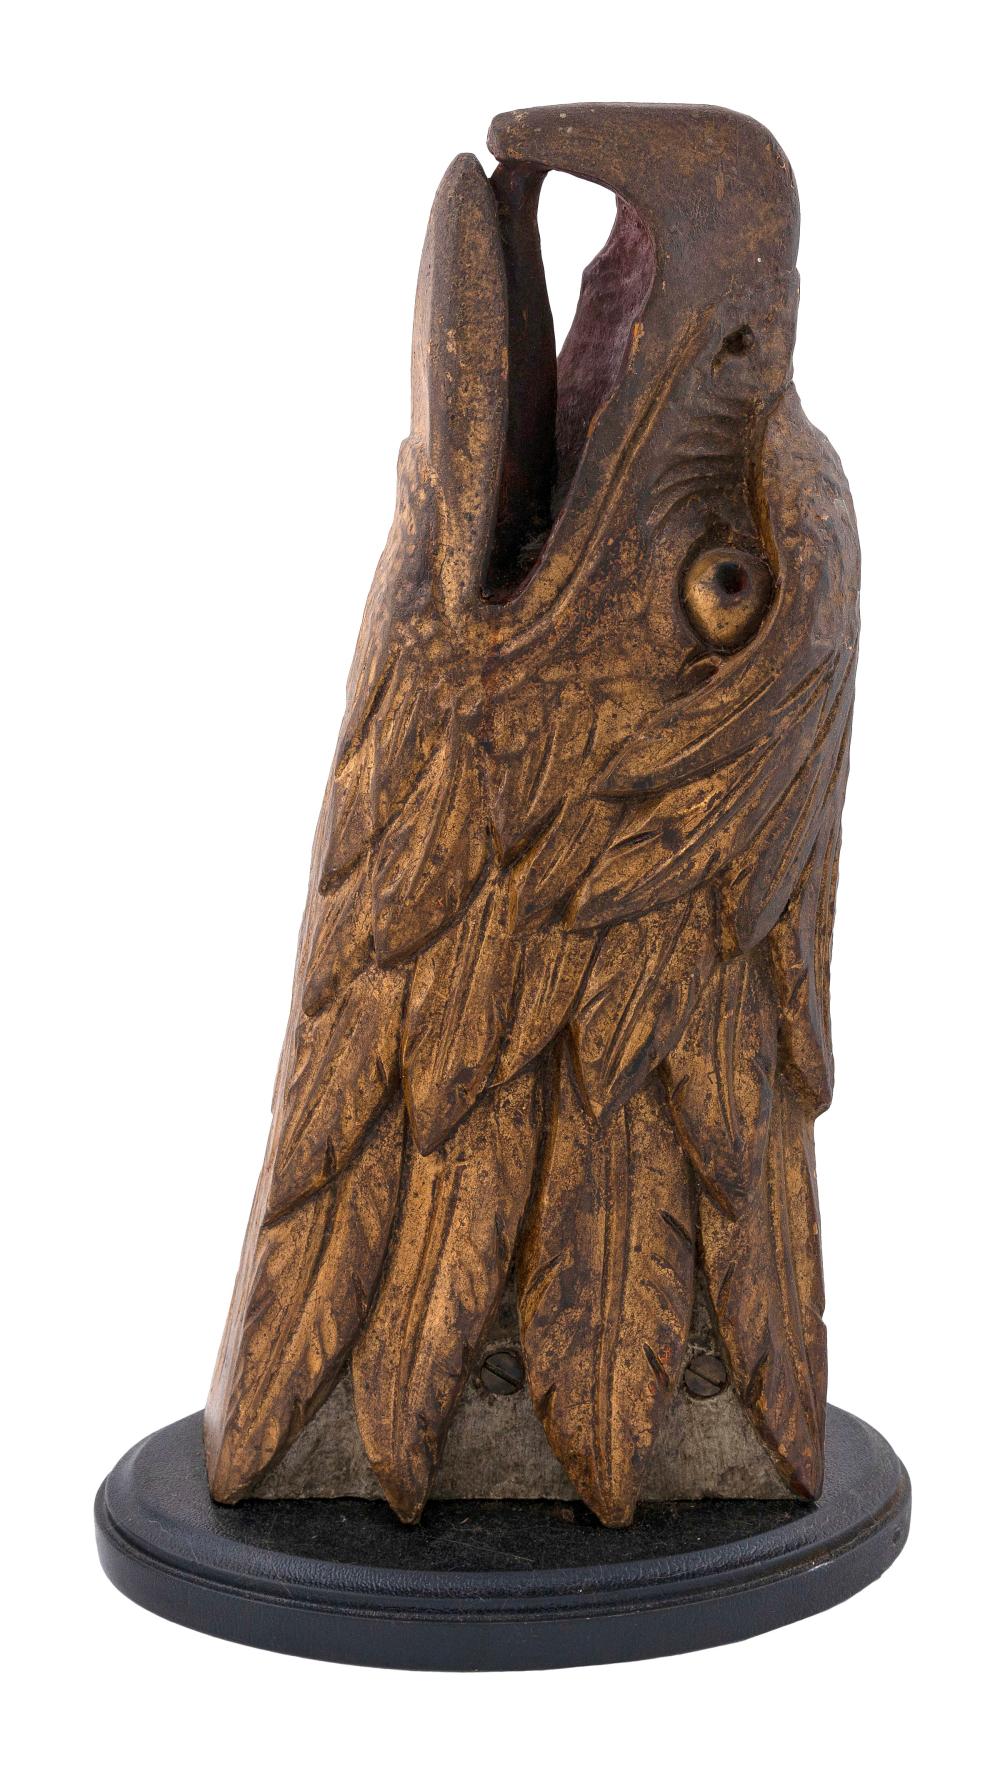 EXCEPTIONAL CARVED WOODEN EAGLE S HEAD 3502d8